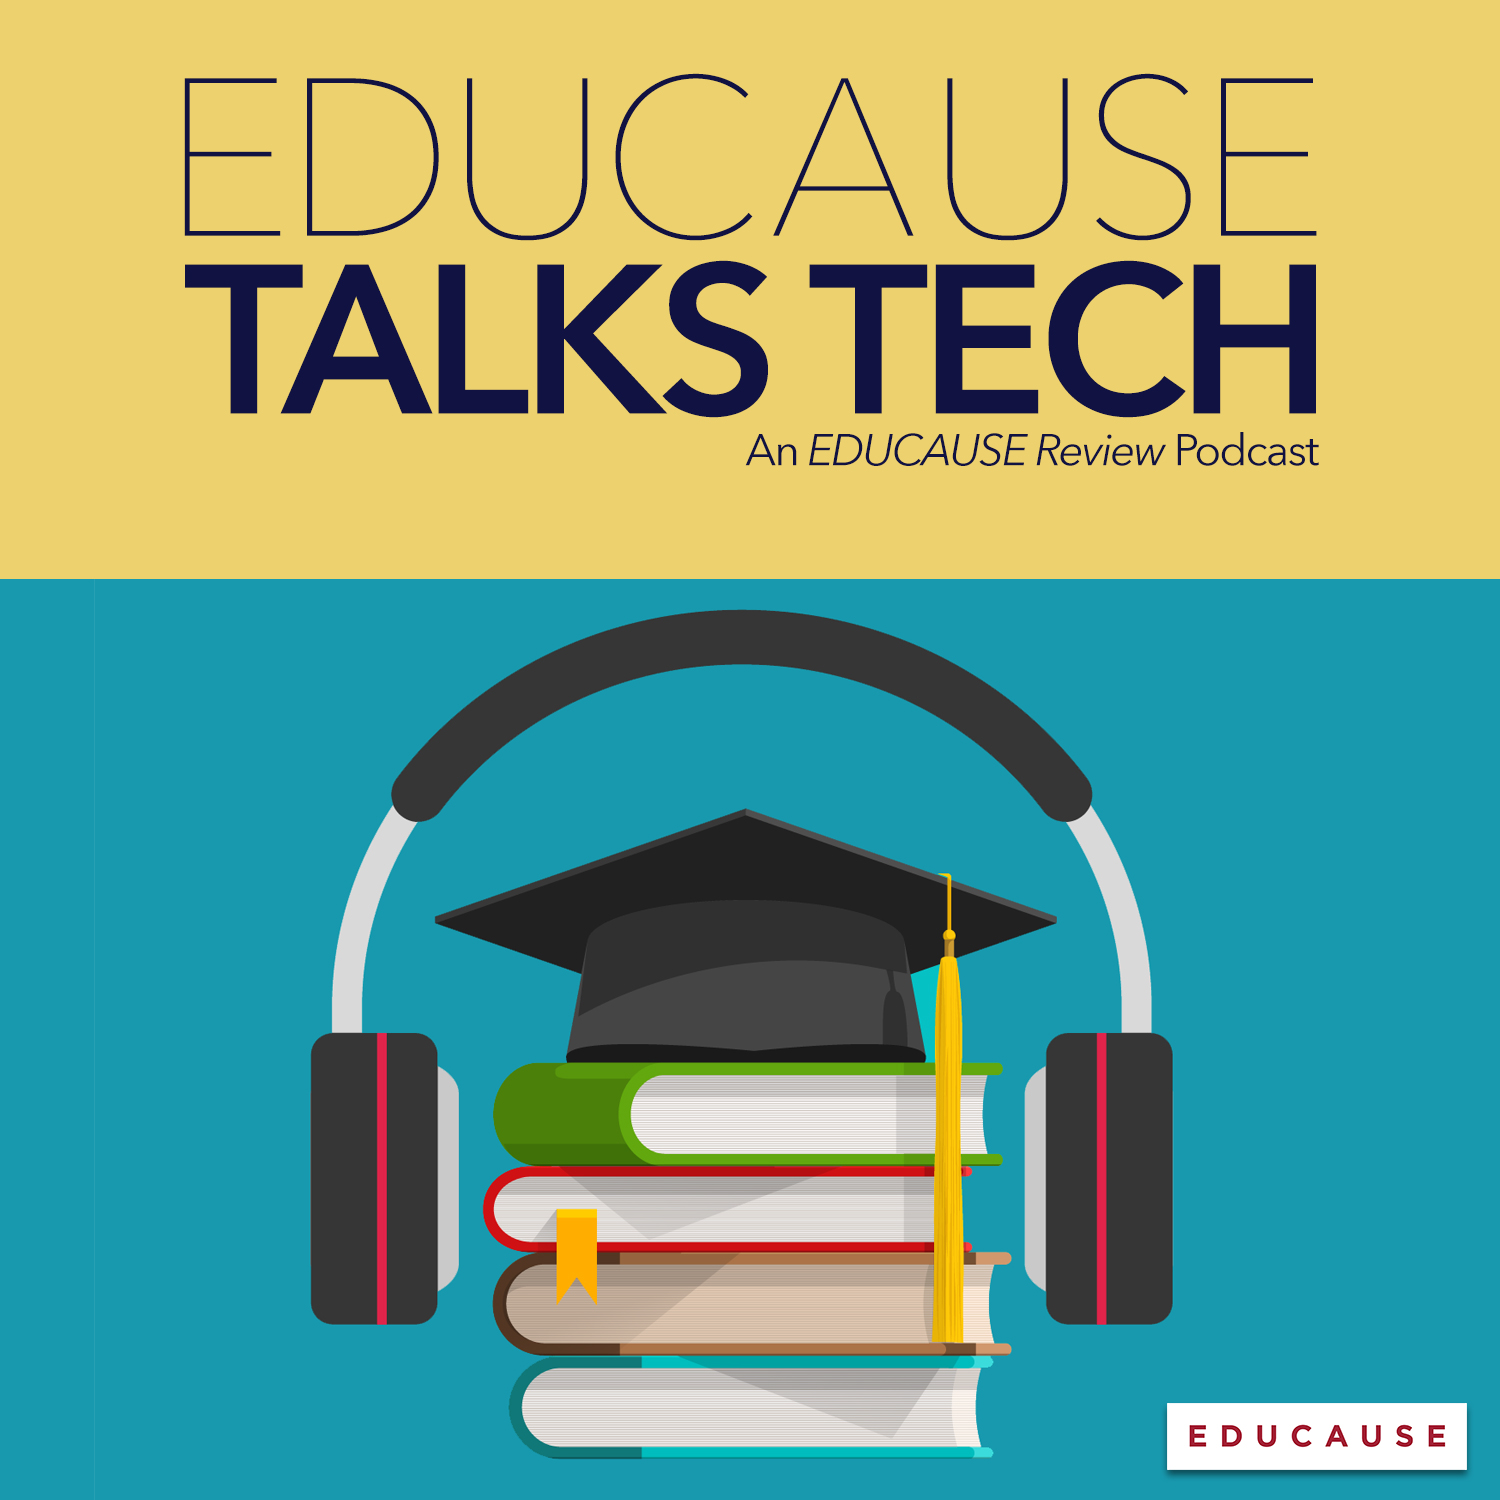 EDUCAUSE Talks Tech | An EDUCAUSE Review Podcast | Artwork with illustration of a stack of books with a mortar board on top encircled by headphones